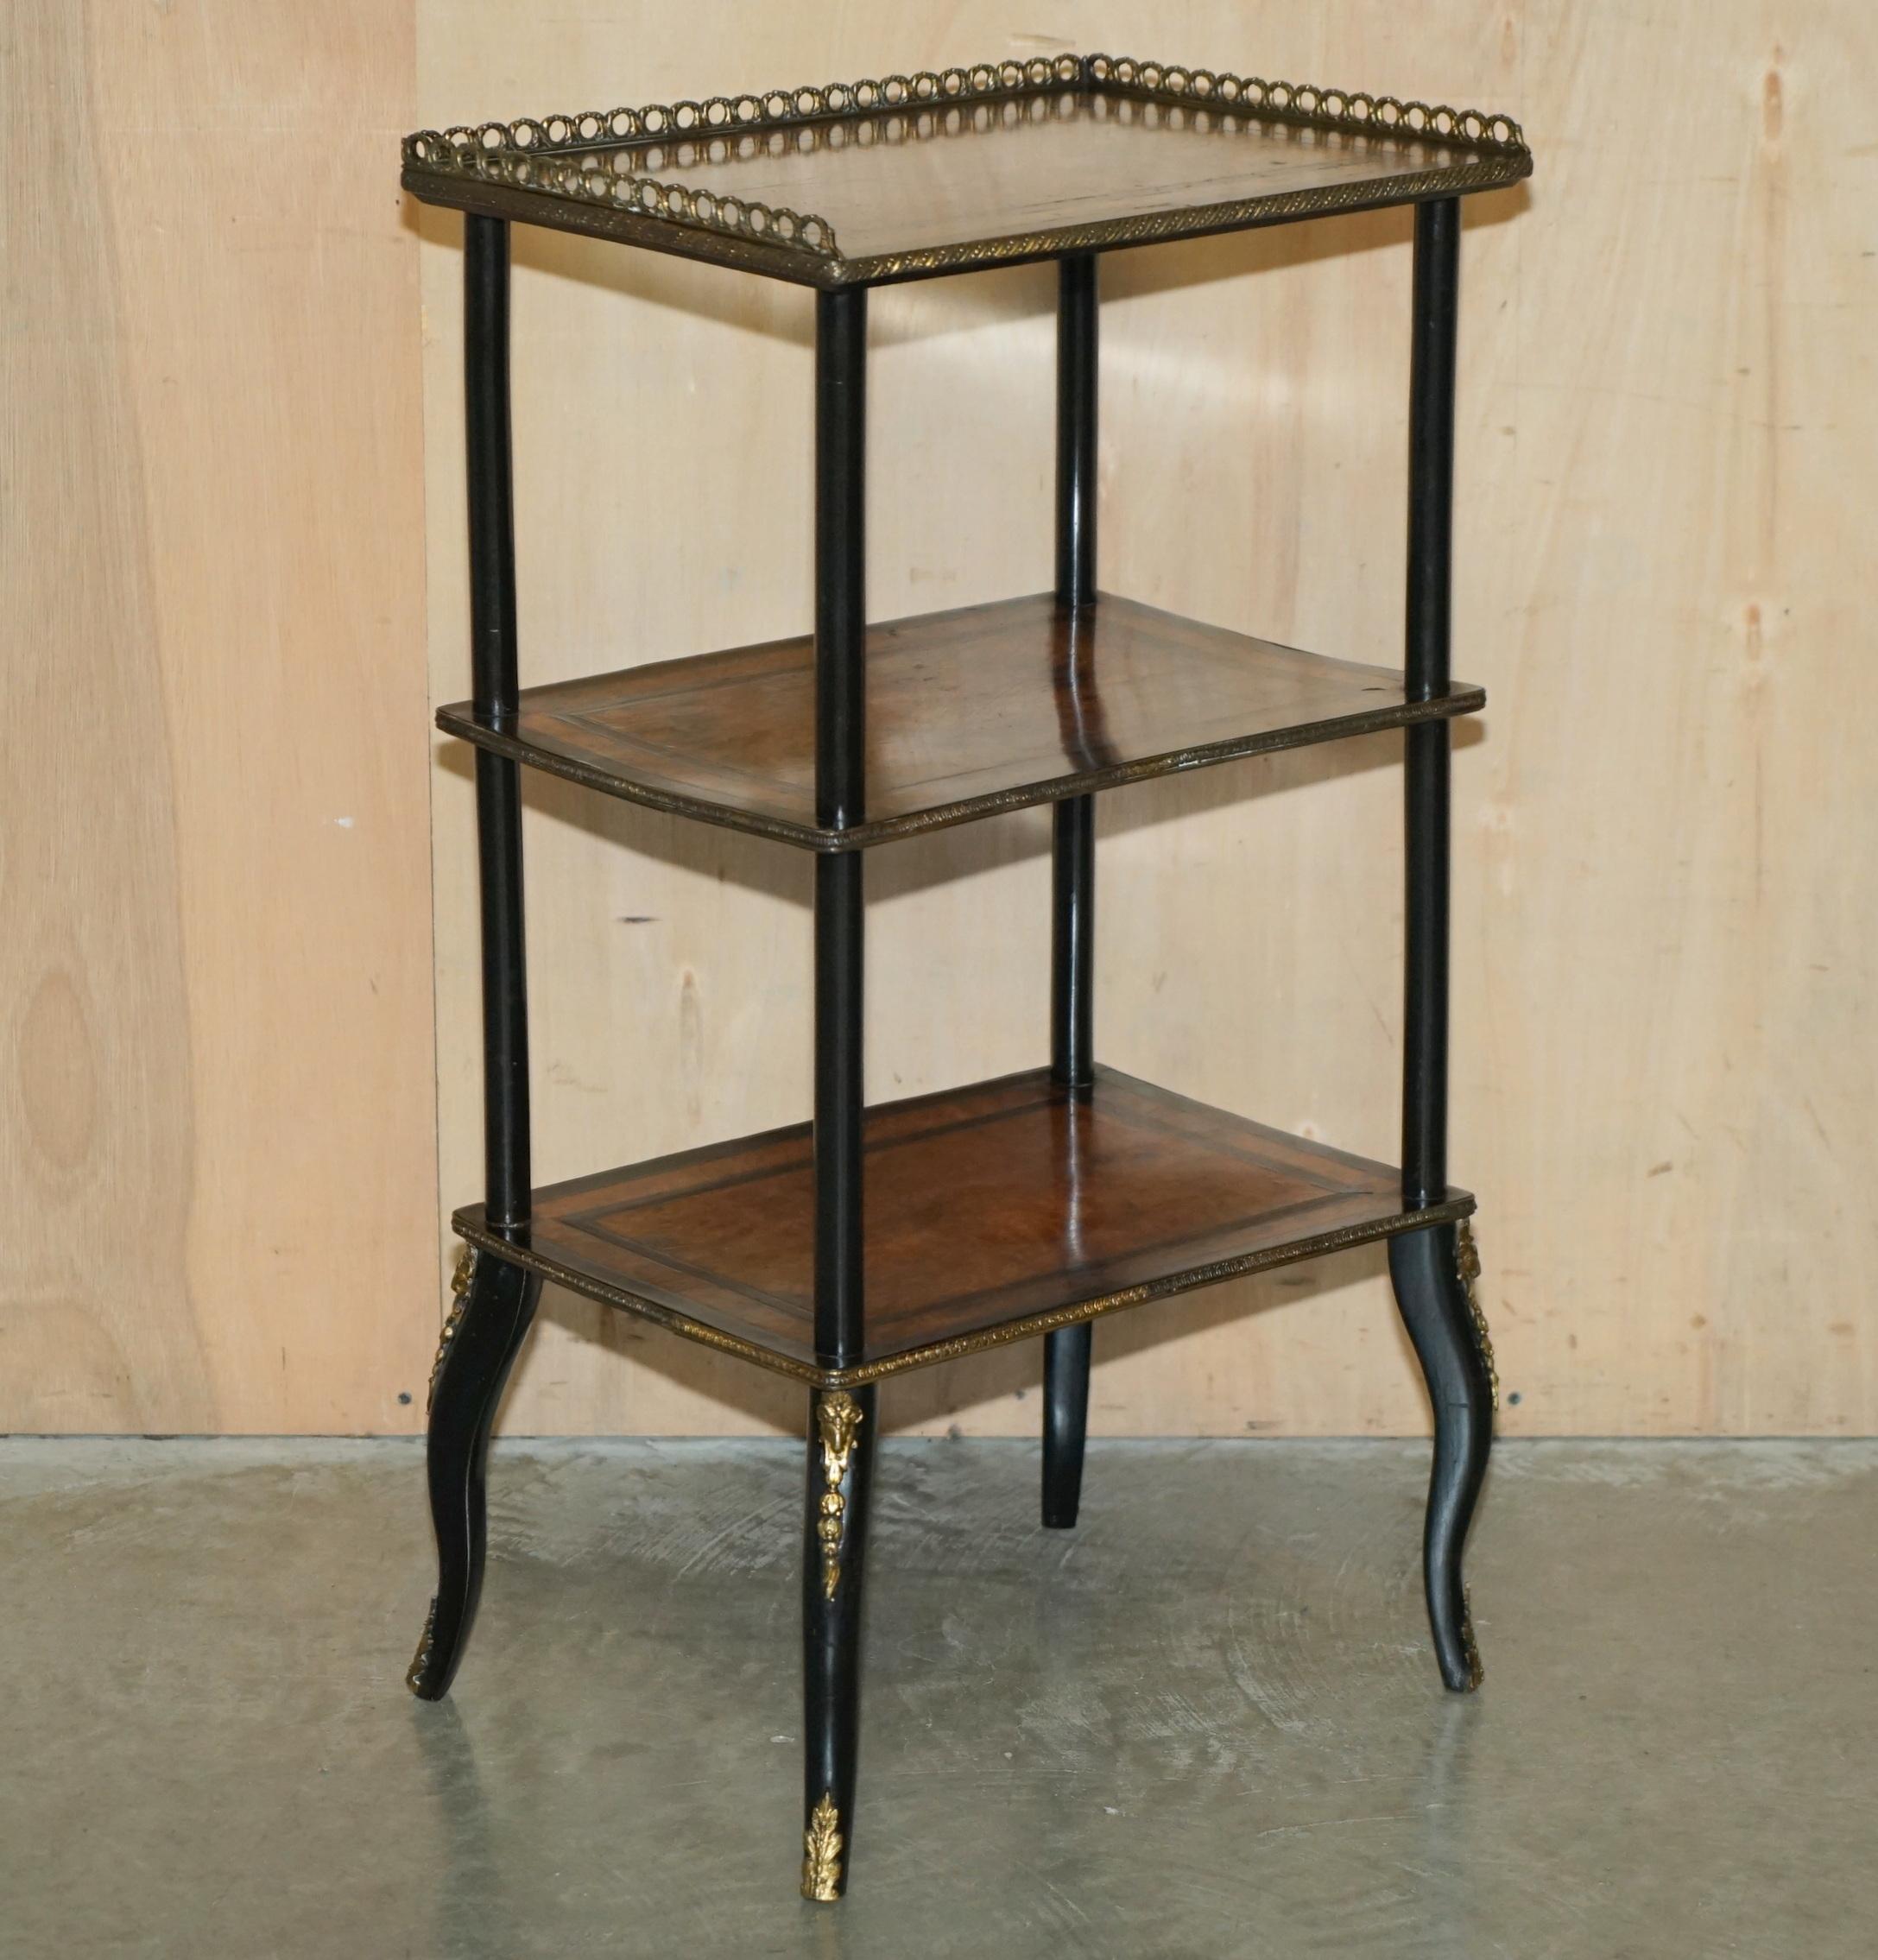 Victorian PAIR OF ViCTORIAN EBONISED AMBOYNA WOOD ETAGERES SIDE END LAMP WINE TABLES For Sale